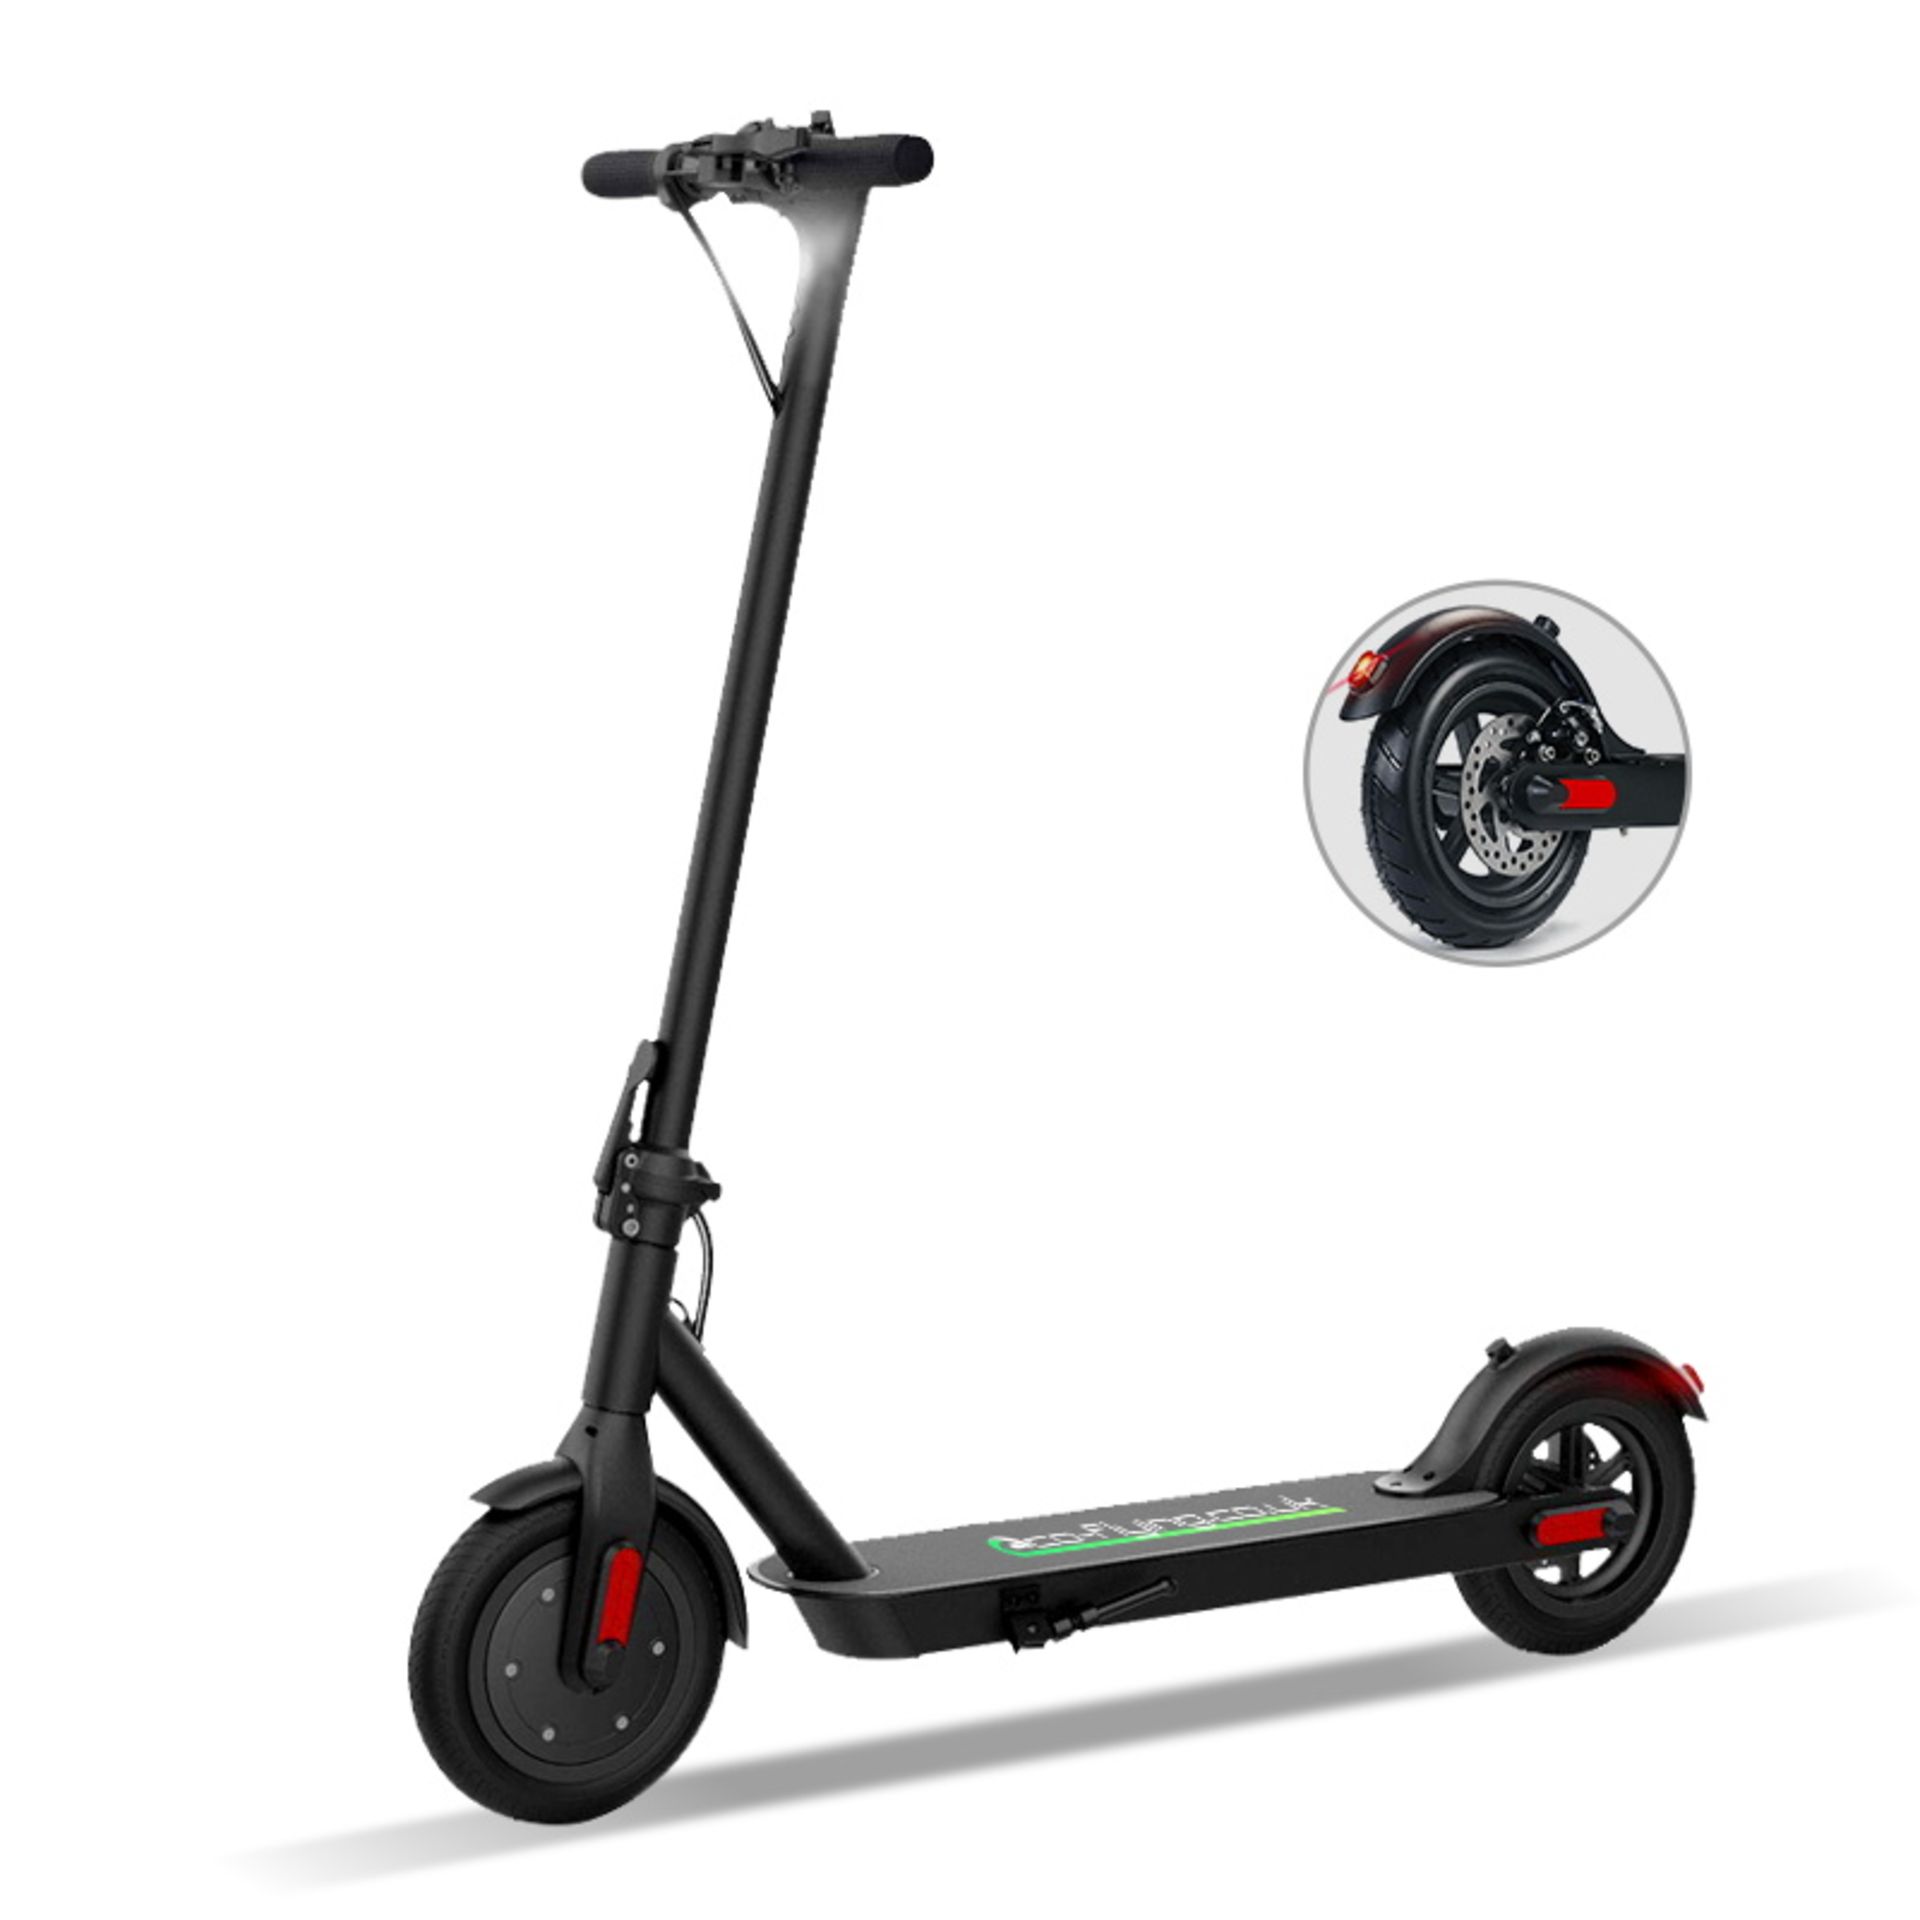 E-Scooter 7.5 Ah Foldable Electric Scooter 300 watt - Image 2 of 5